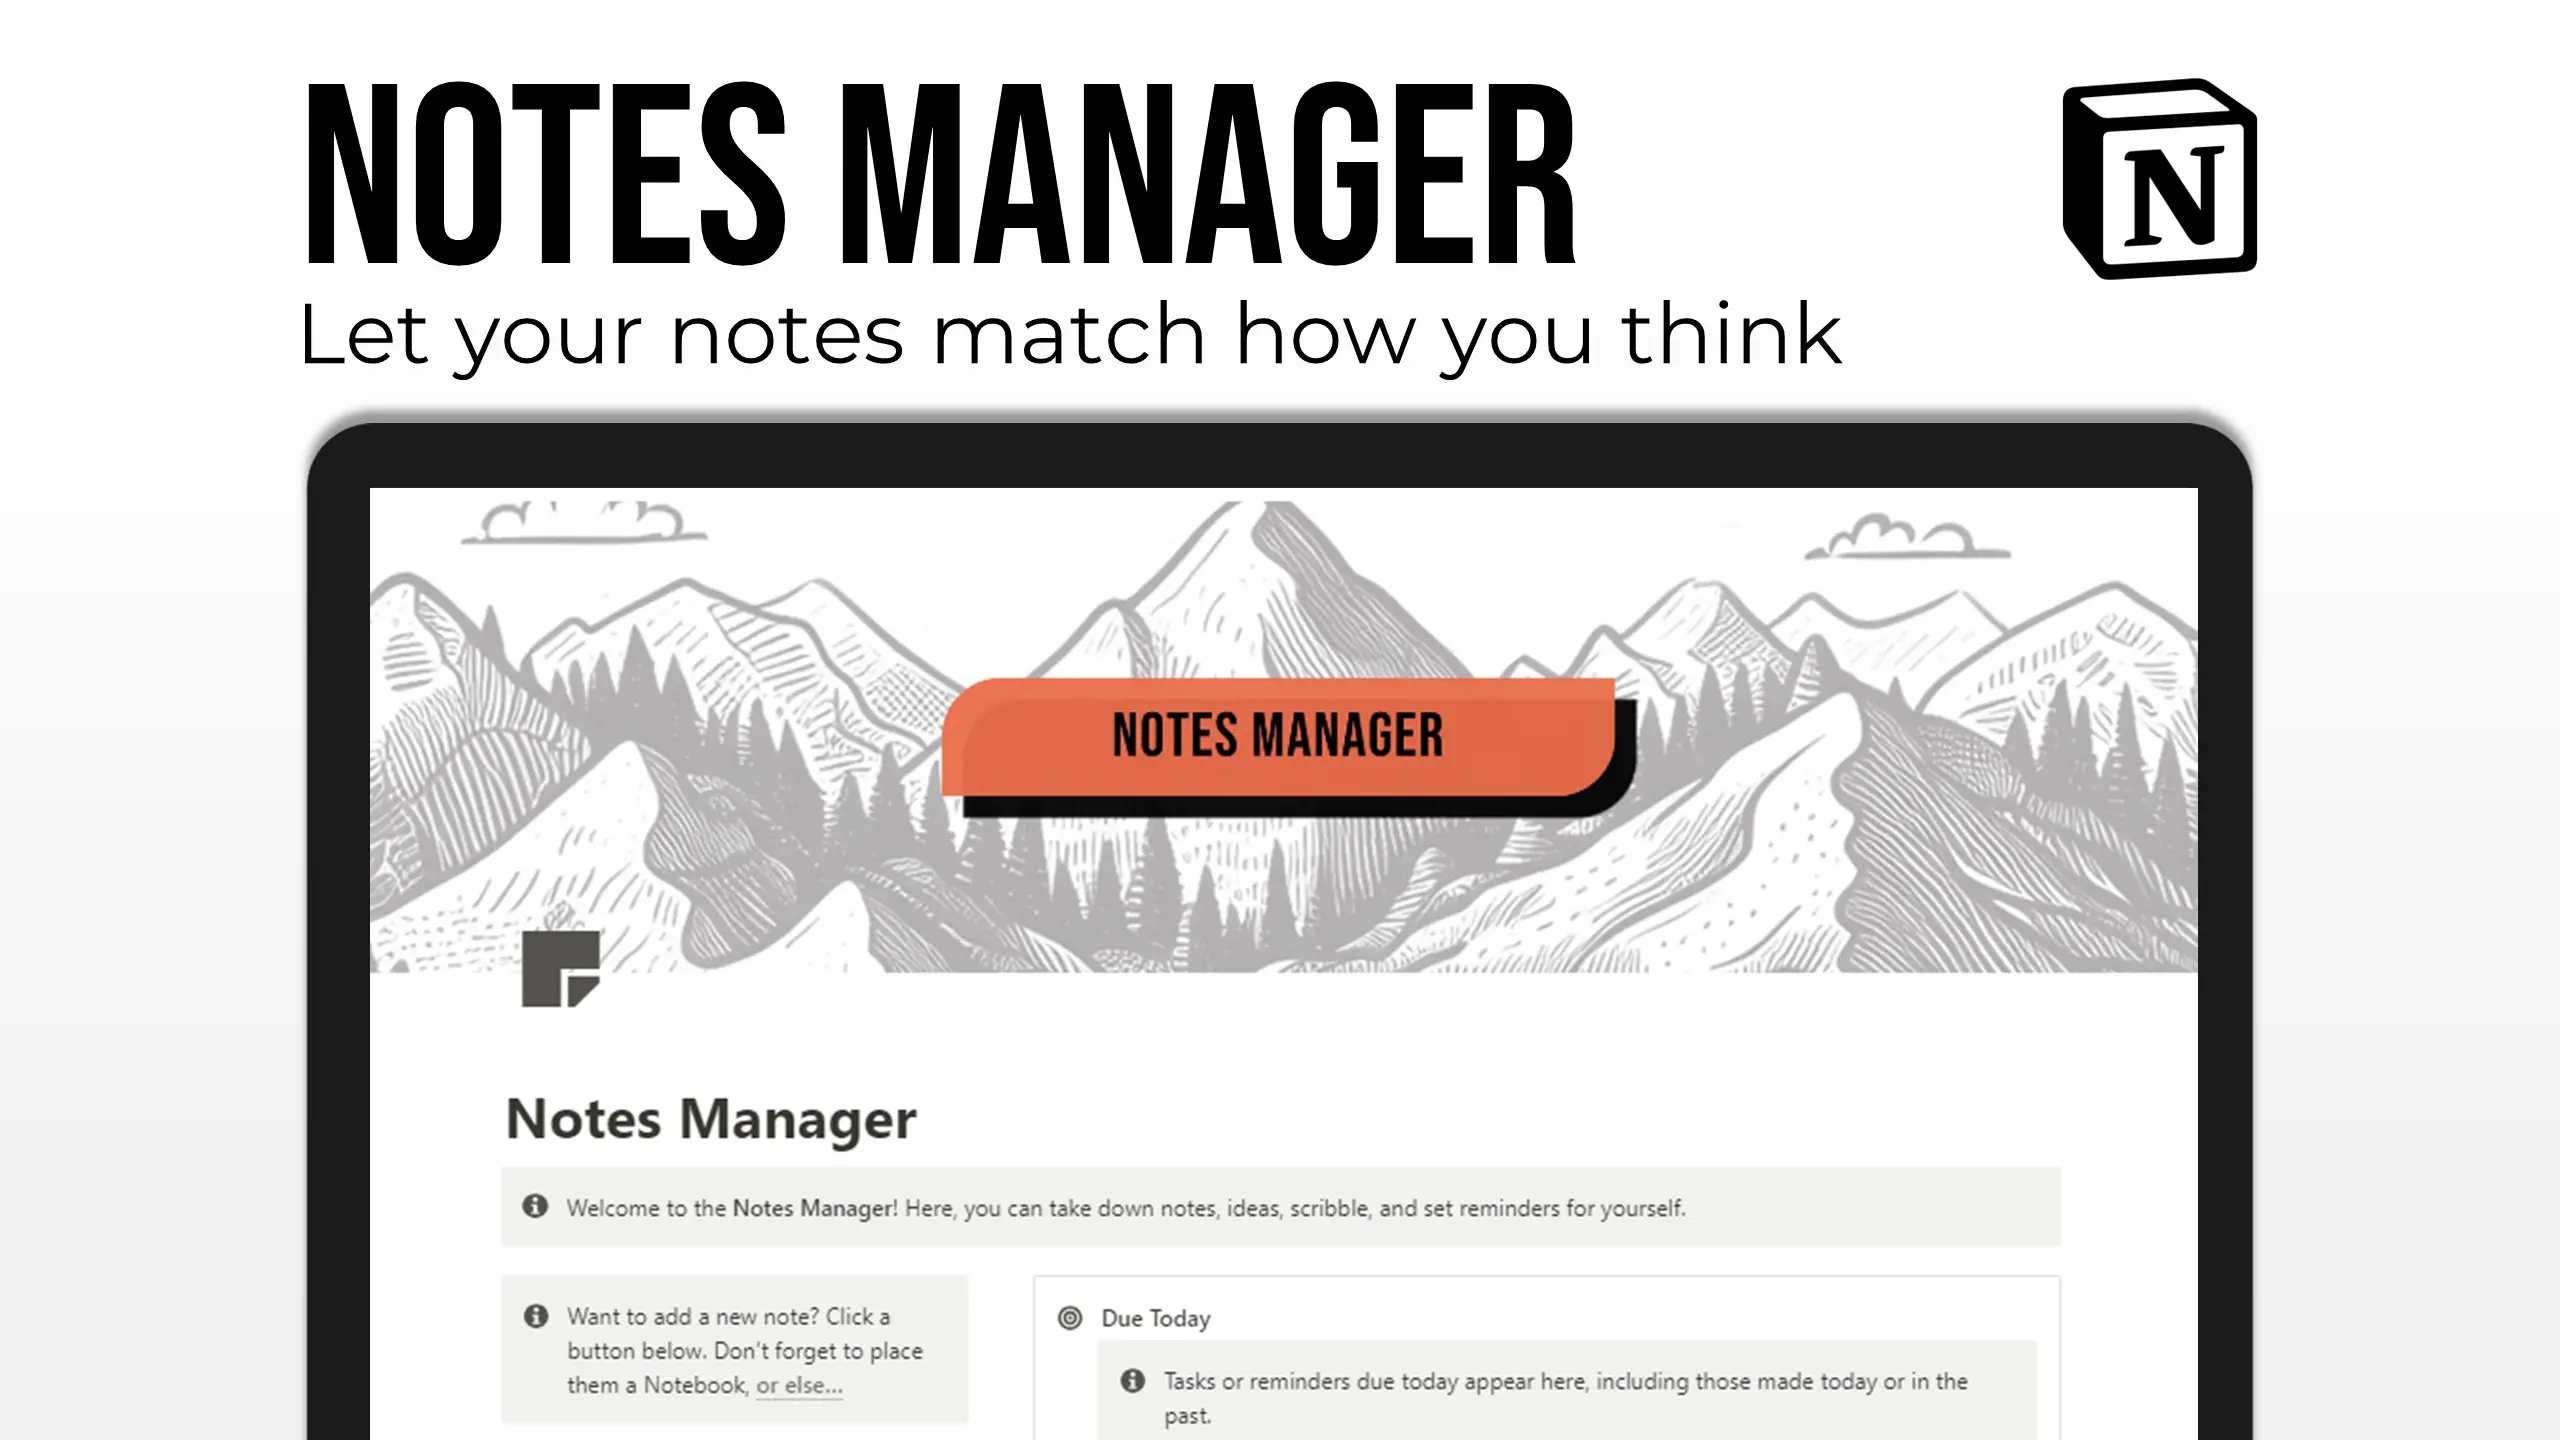 Notes Manager image